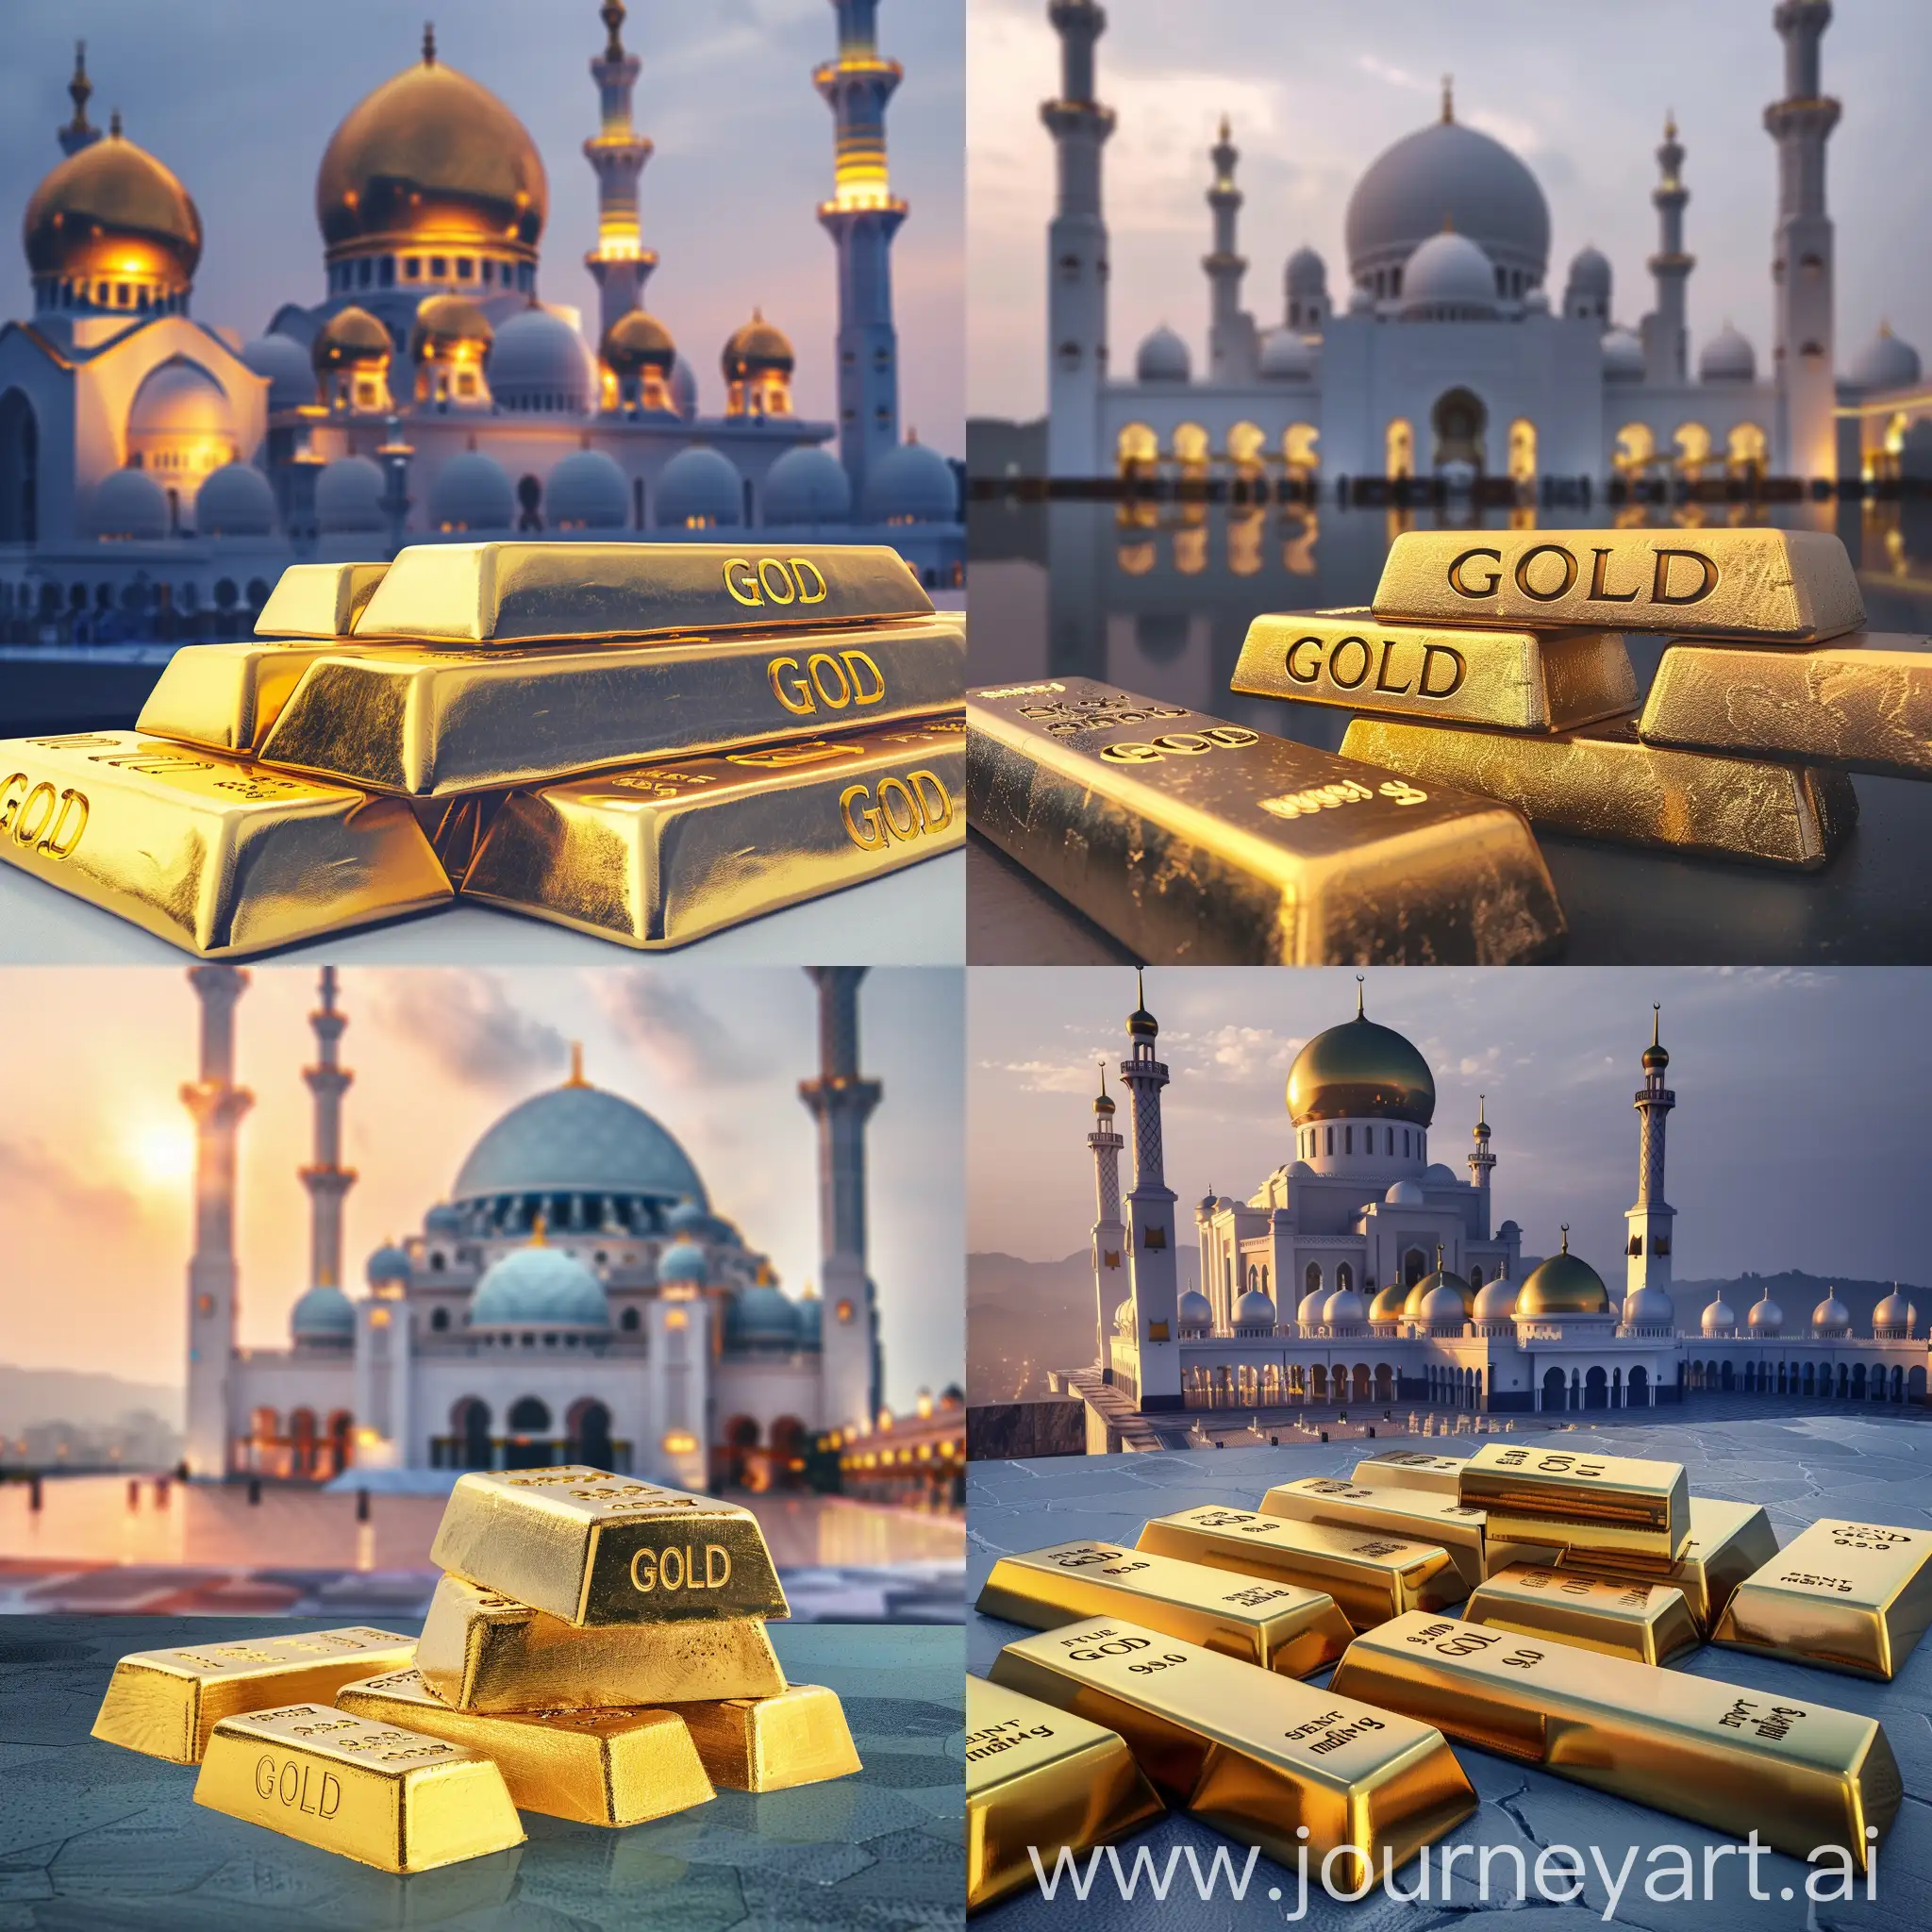 Mosque-with-Gold-Bars-Inscribed-with-GOLD